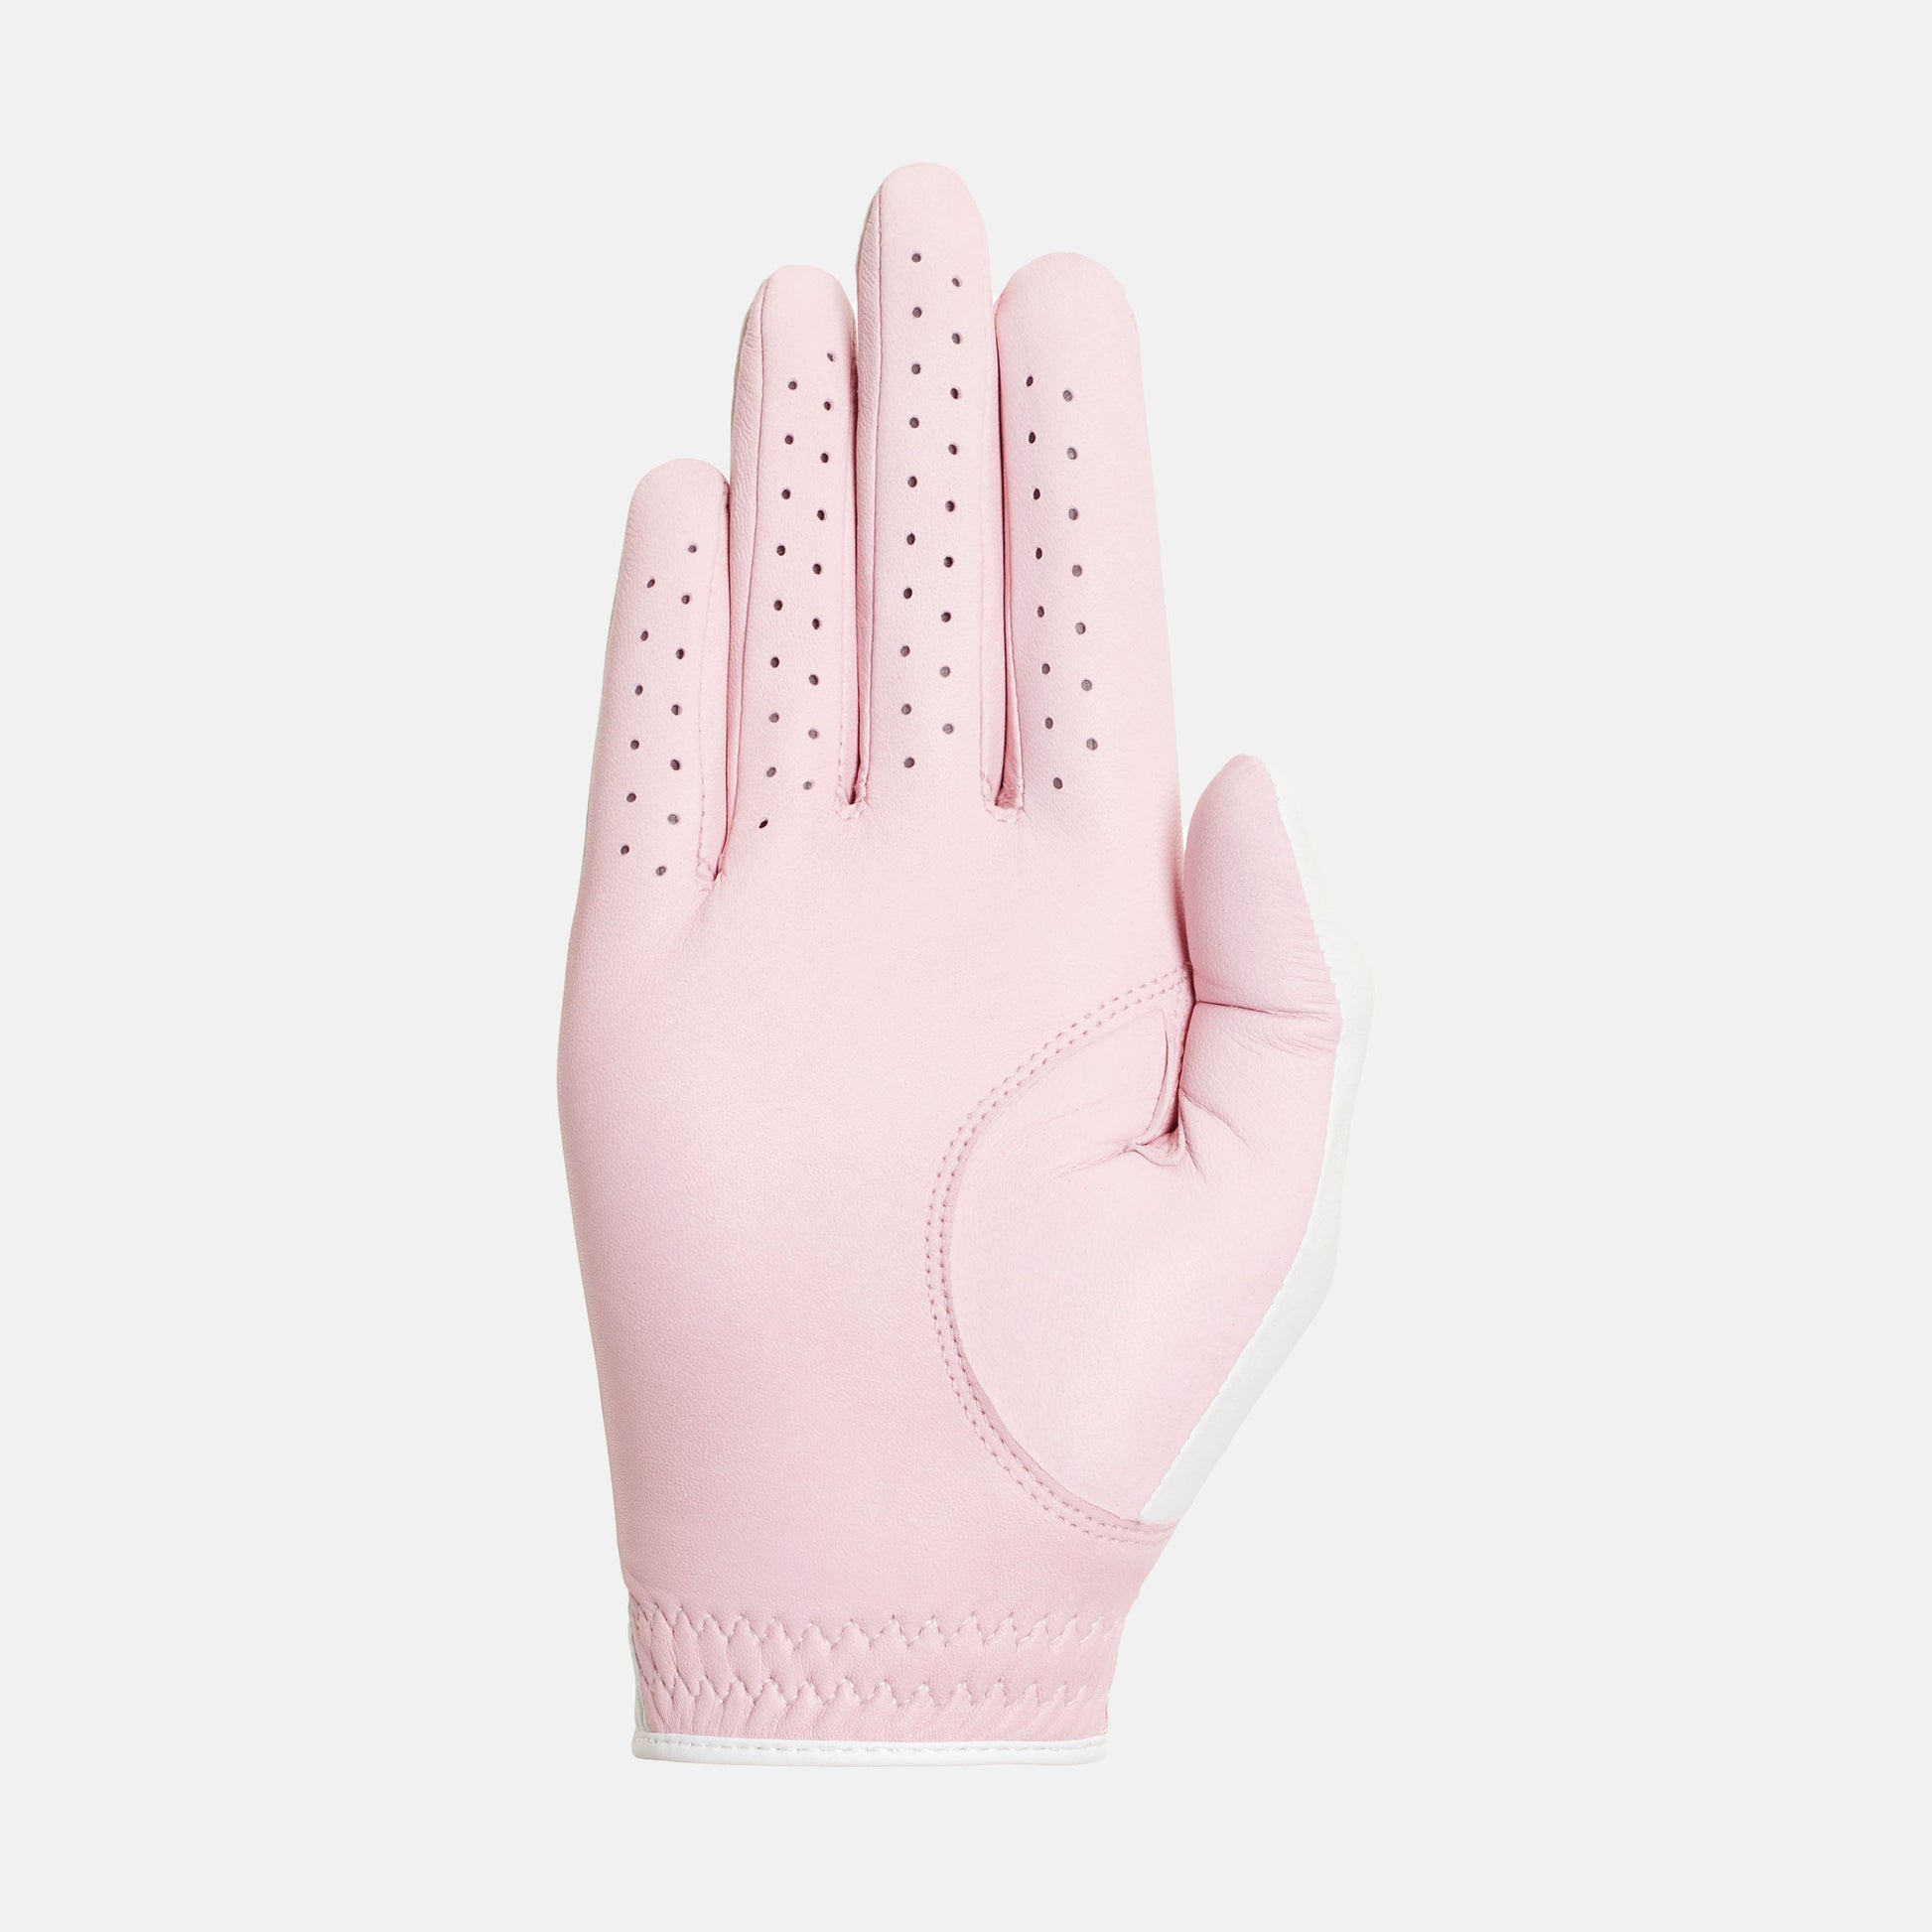 Yasmine white pink women's golf glove left stylish design and excellence performance